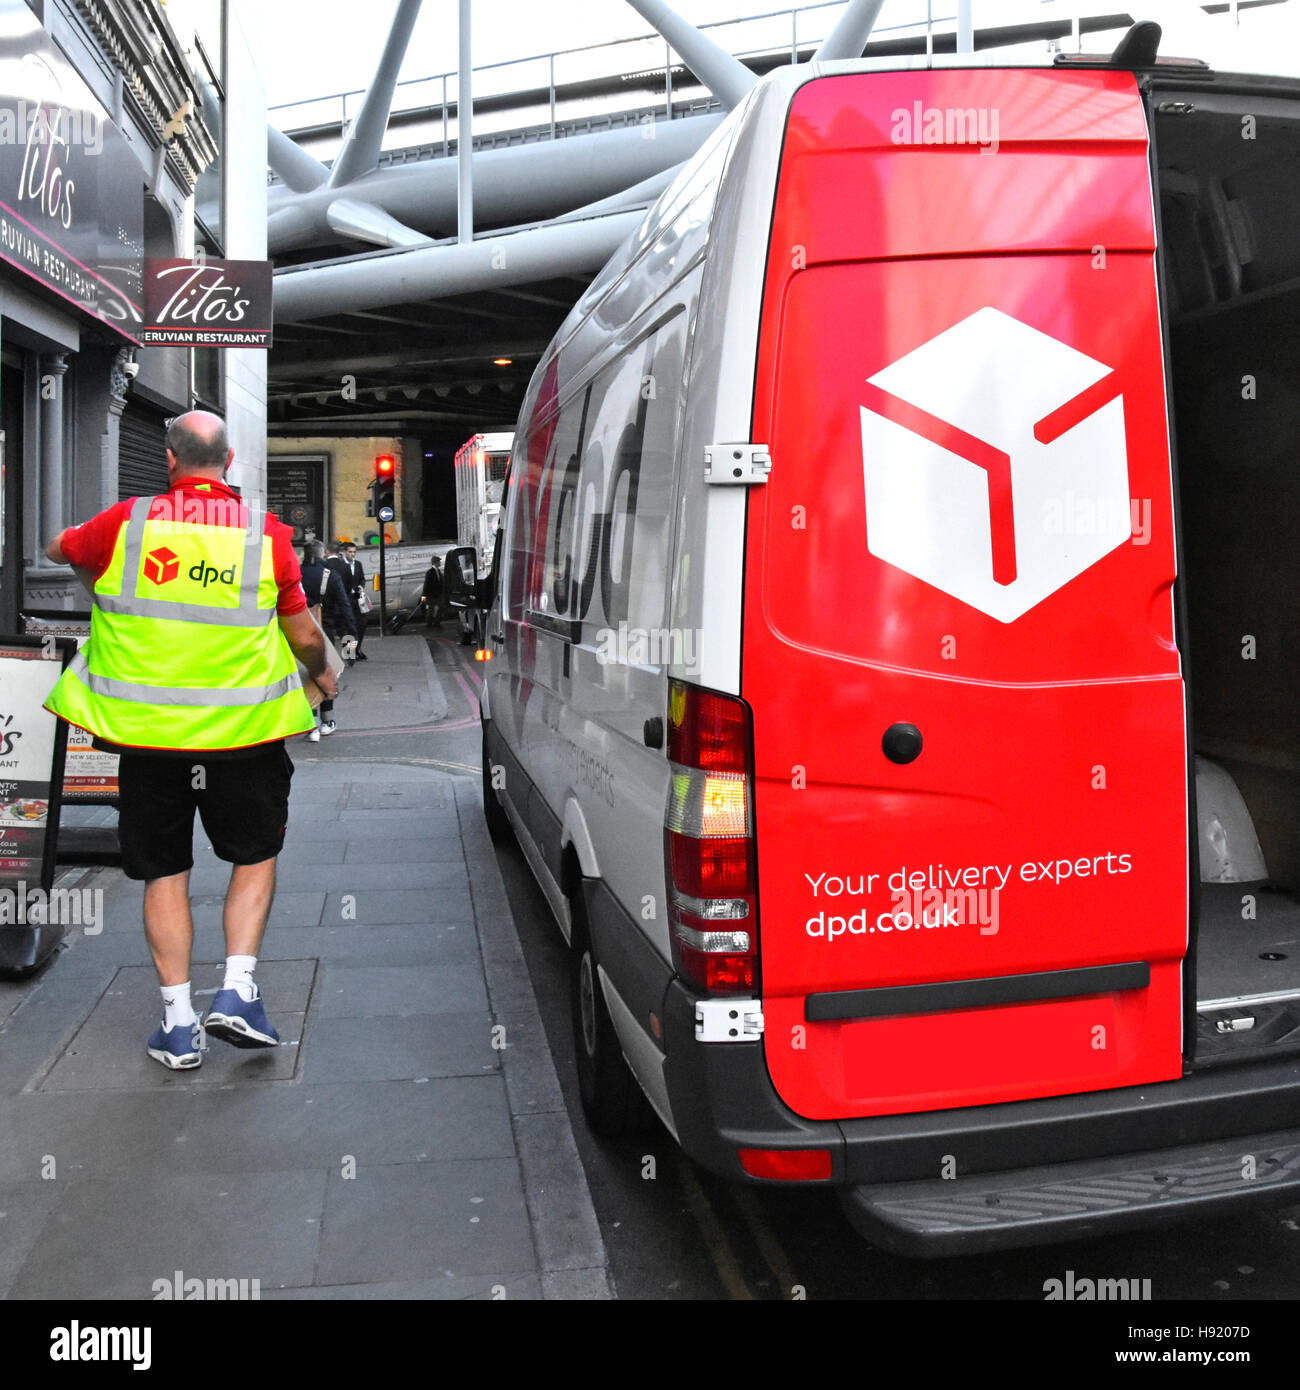 DPD logistics van delivery man driver carrying parcel to address in London England UK wearing health & safety high vis jacket Stock Photo